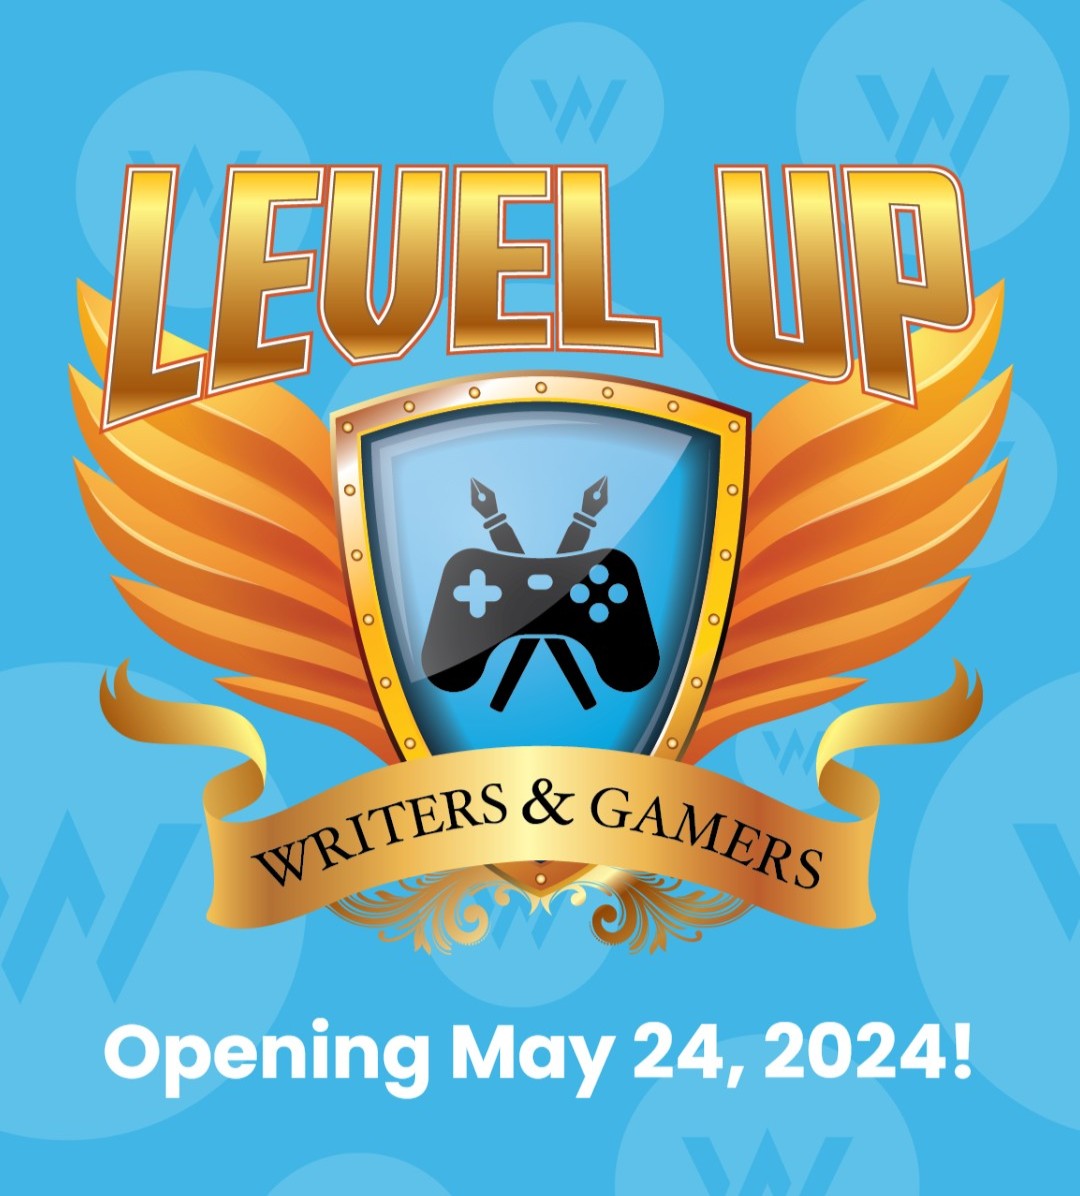 We're so excited to announce our upcoming exhibit, Level Up: Writers and Gamers! Opening May 24, This special exhibit explores how Americans use role-playing and video games to define and respond to our culture. To find out more about Level Up, click here bit.ly/49MKYEE